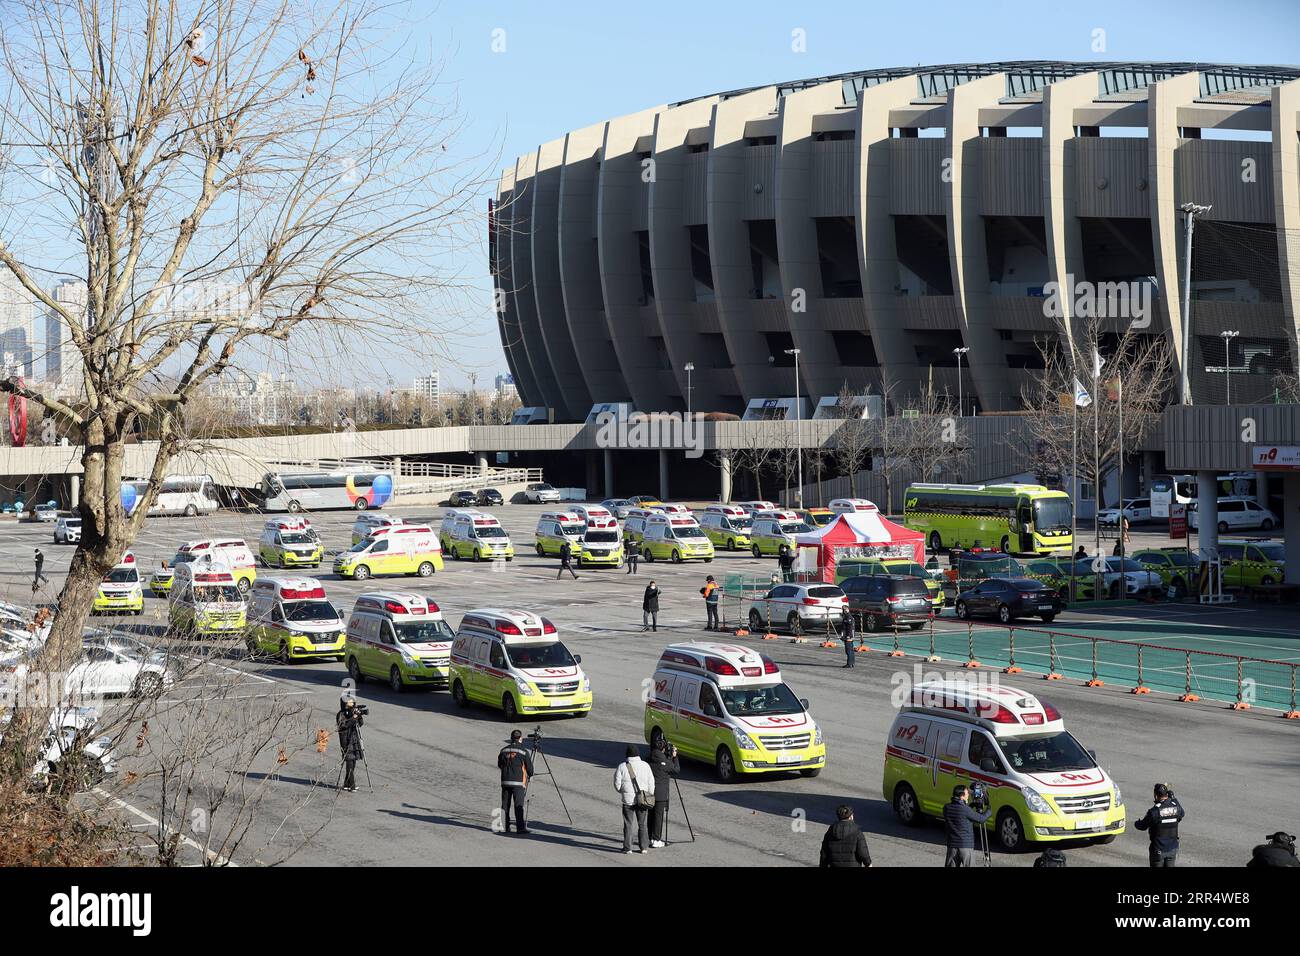 201214 -- SEOUL, Dec. 14, 2020 -- Ambulances set off to transfer confirmed cases and suspected patients near the Jamsil Sports Complex in Songpa-gu of Seoul, South Korea, Dec. 14, 2020. In the latest tally, South Korea reported 718 more cases of COVID-19 for the past 24 hours, raising the total number of infections to 43,484. It was lower than the country s highest daily caseload of 1,030 tallied on Sunday, but the reading stayed above 100 for 37 days since Nov. 8. NEWSIS/Handout via Xinhua SOUTH KOREA-COVID-19-CASES WangxJingqiang PUBLICATIONxNOTxINxCHN Stock Photo